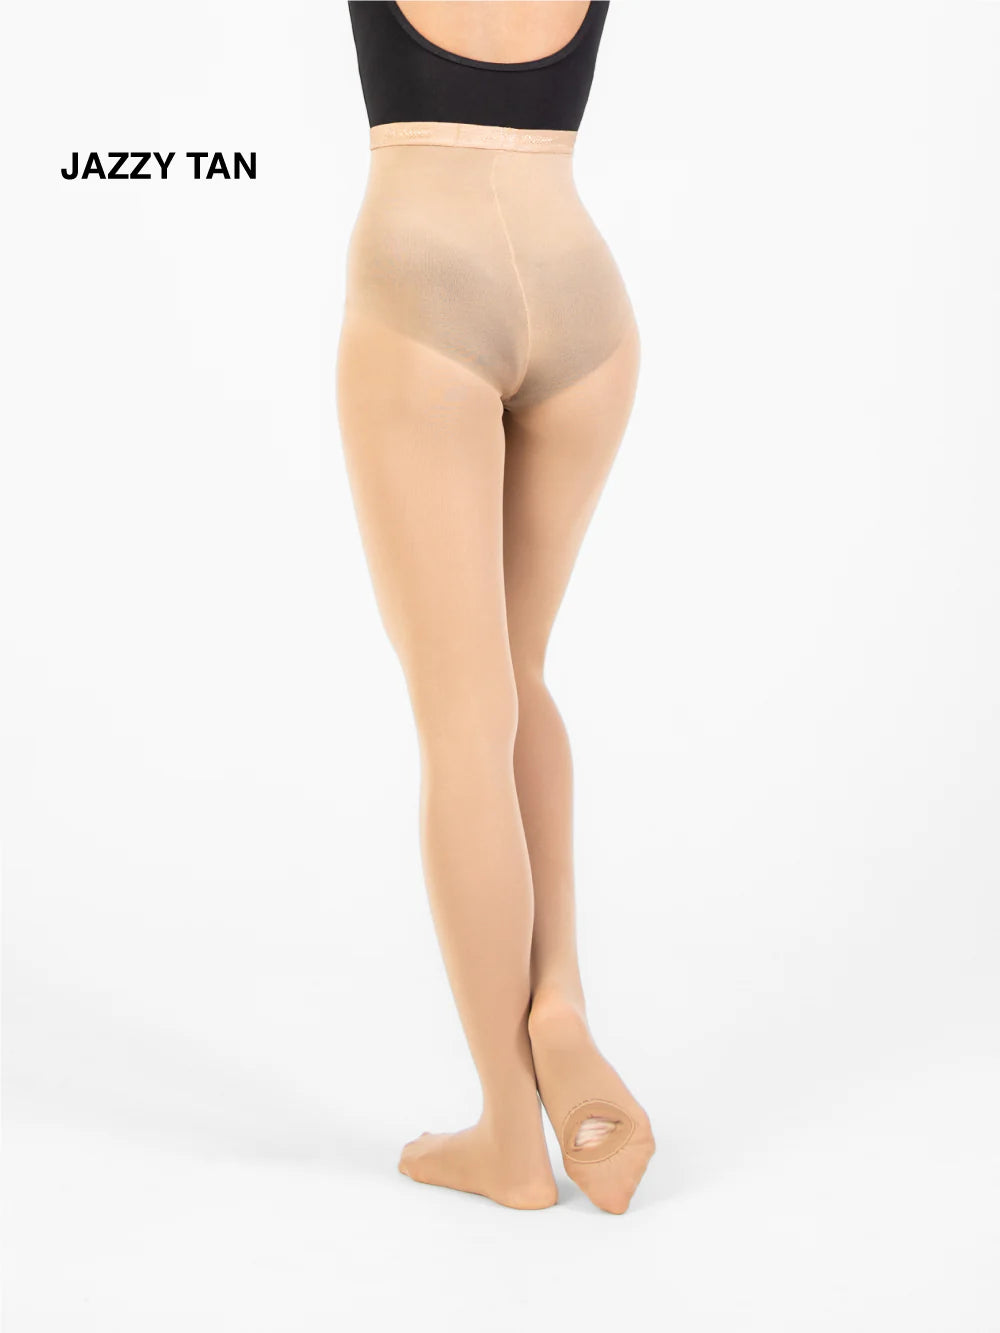 Seamless convertible foot tights in jazzy tan